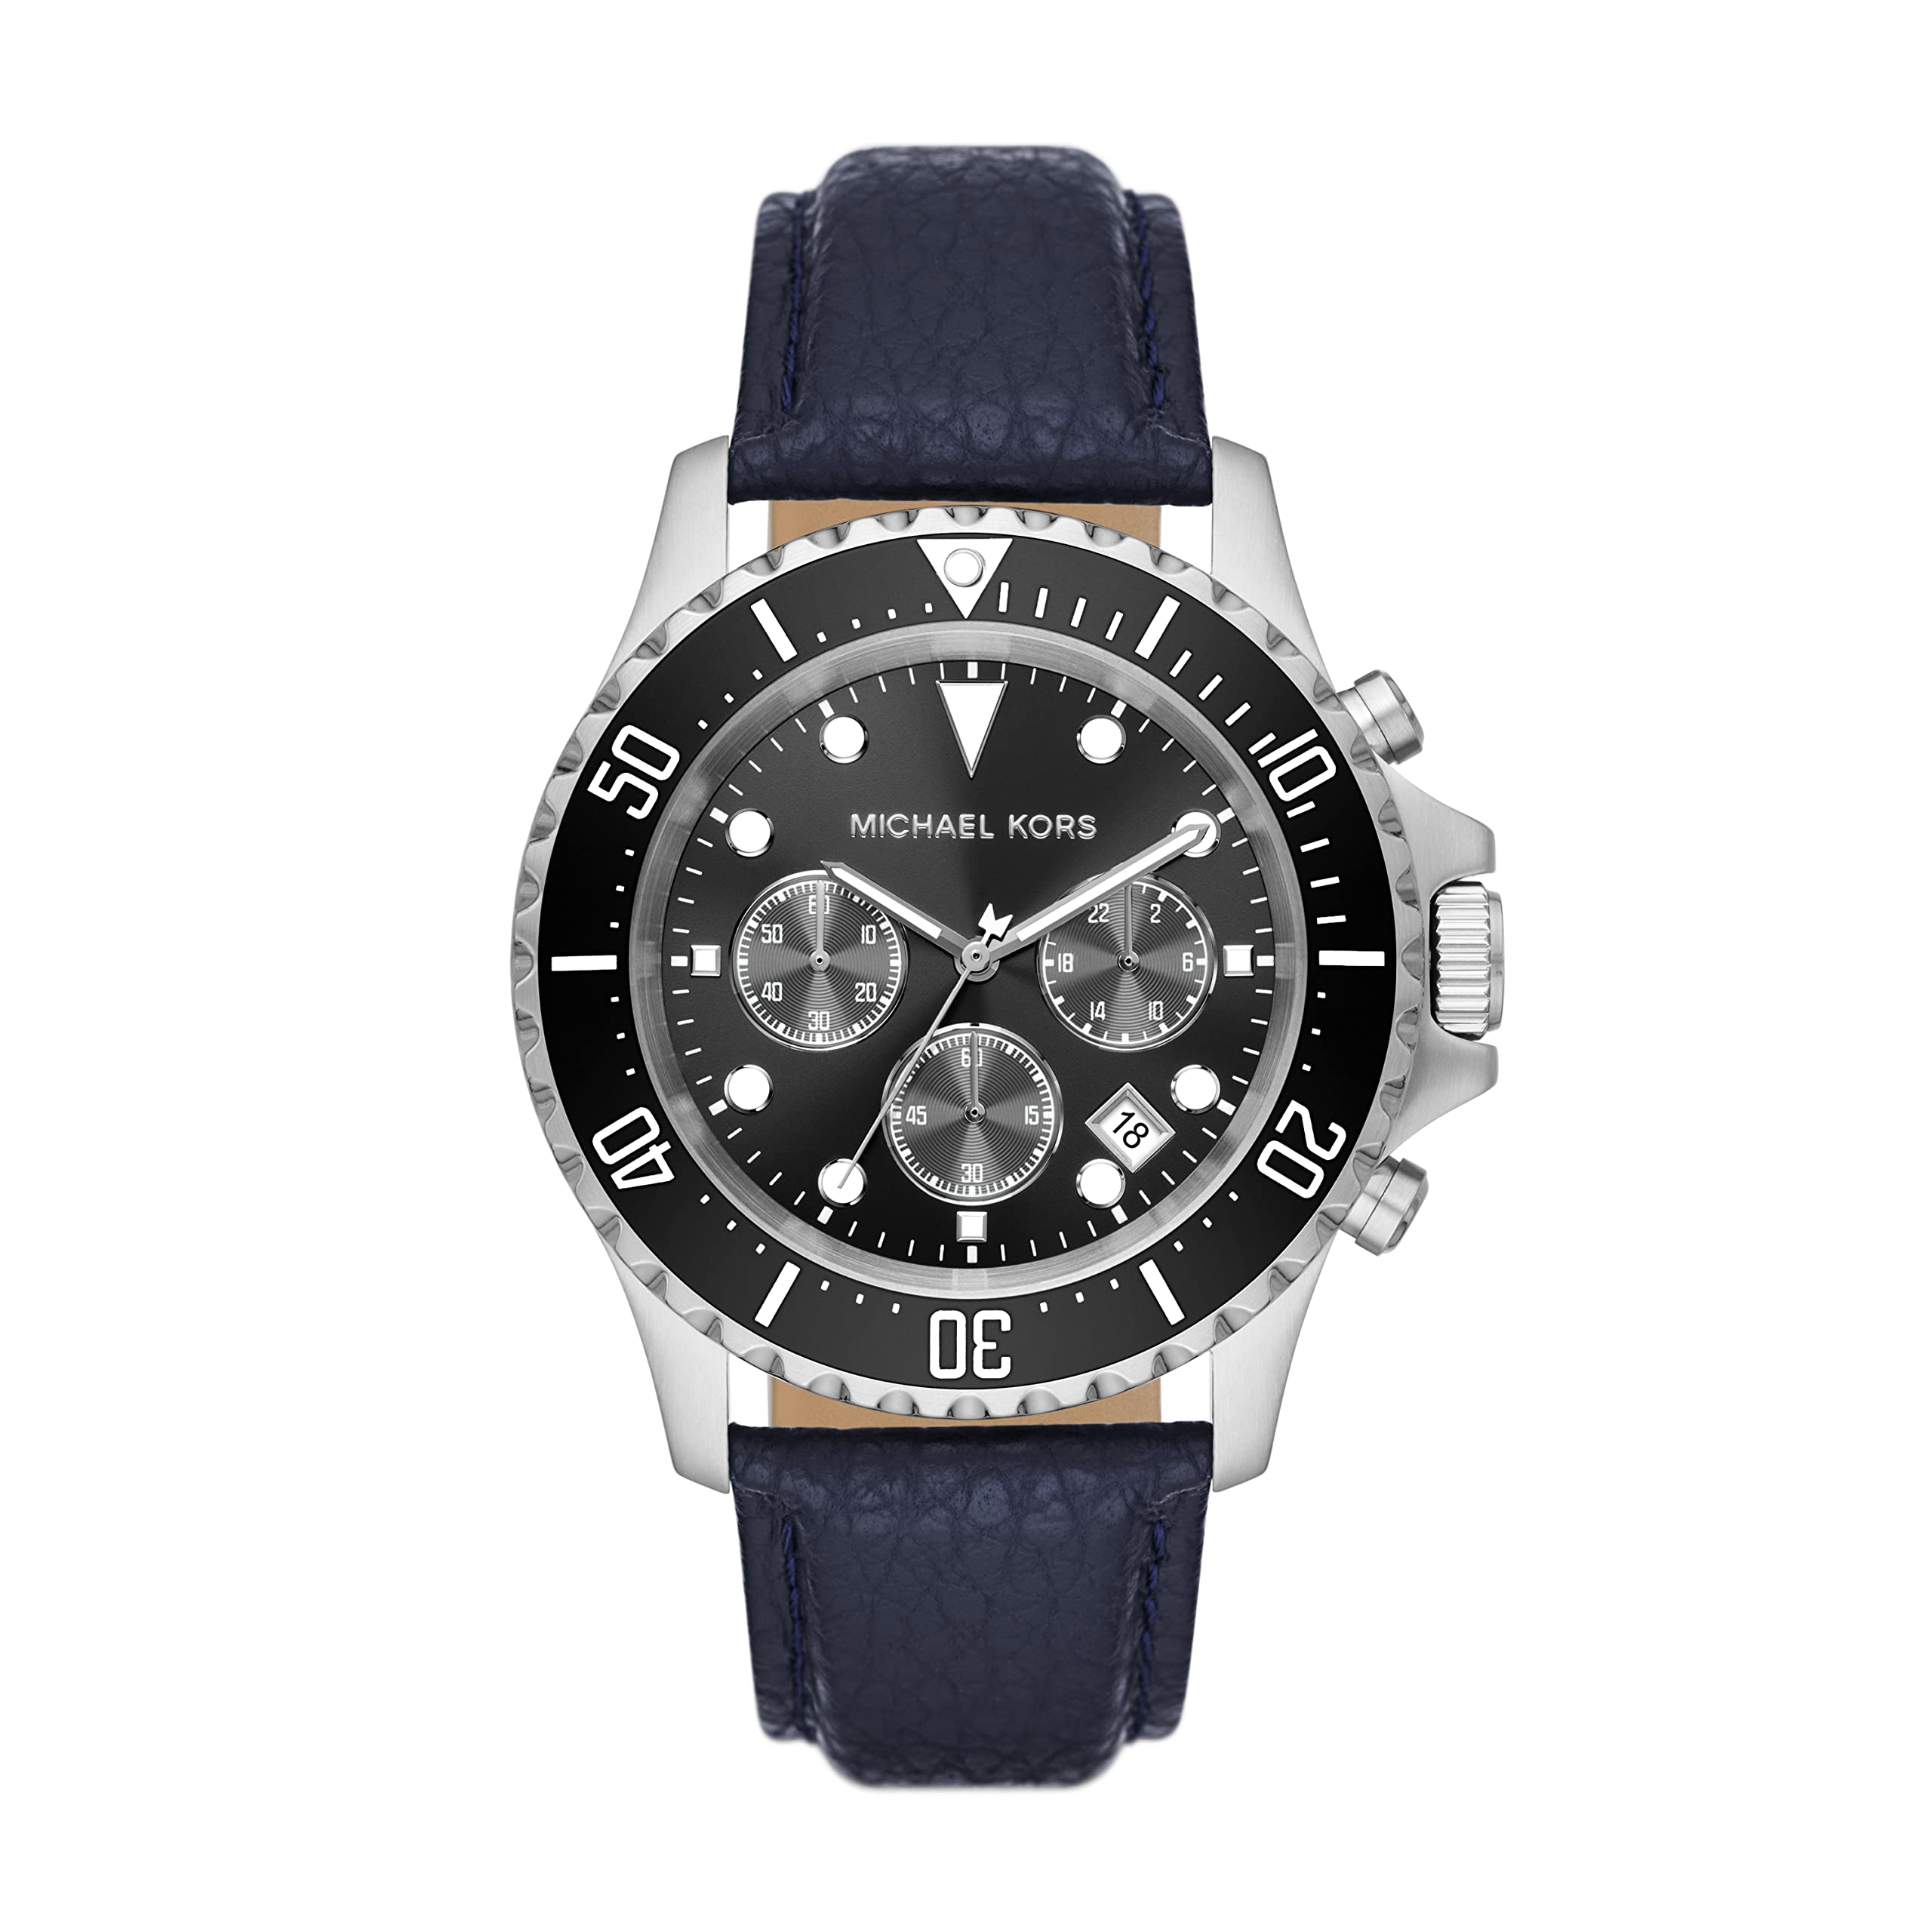 Michael Kors Men's Everest Stainless Steel Chronograph Watch with Steel, Leather, or Silicone Band